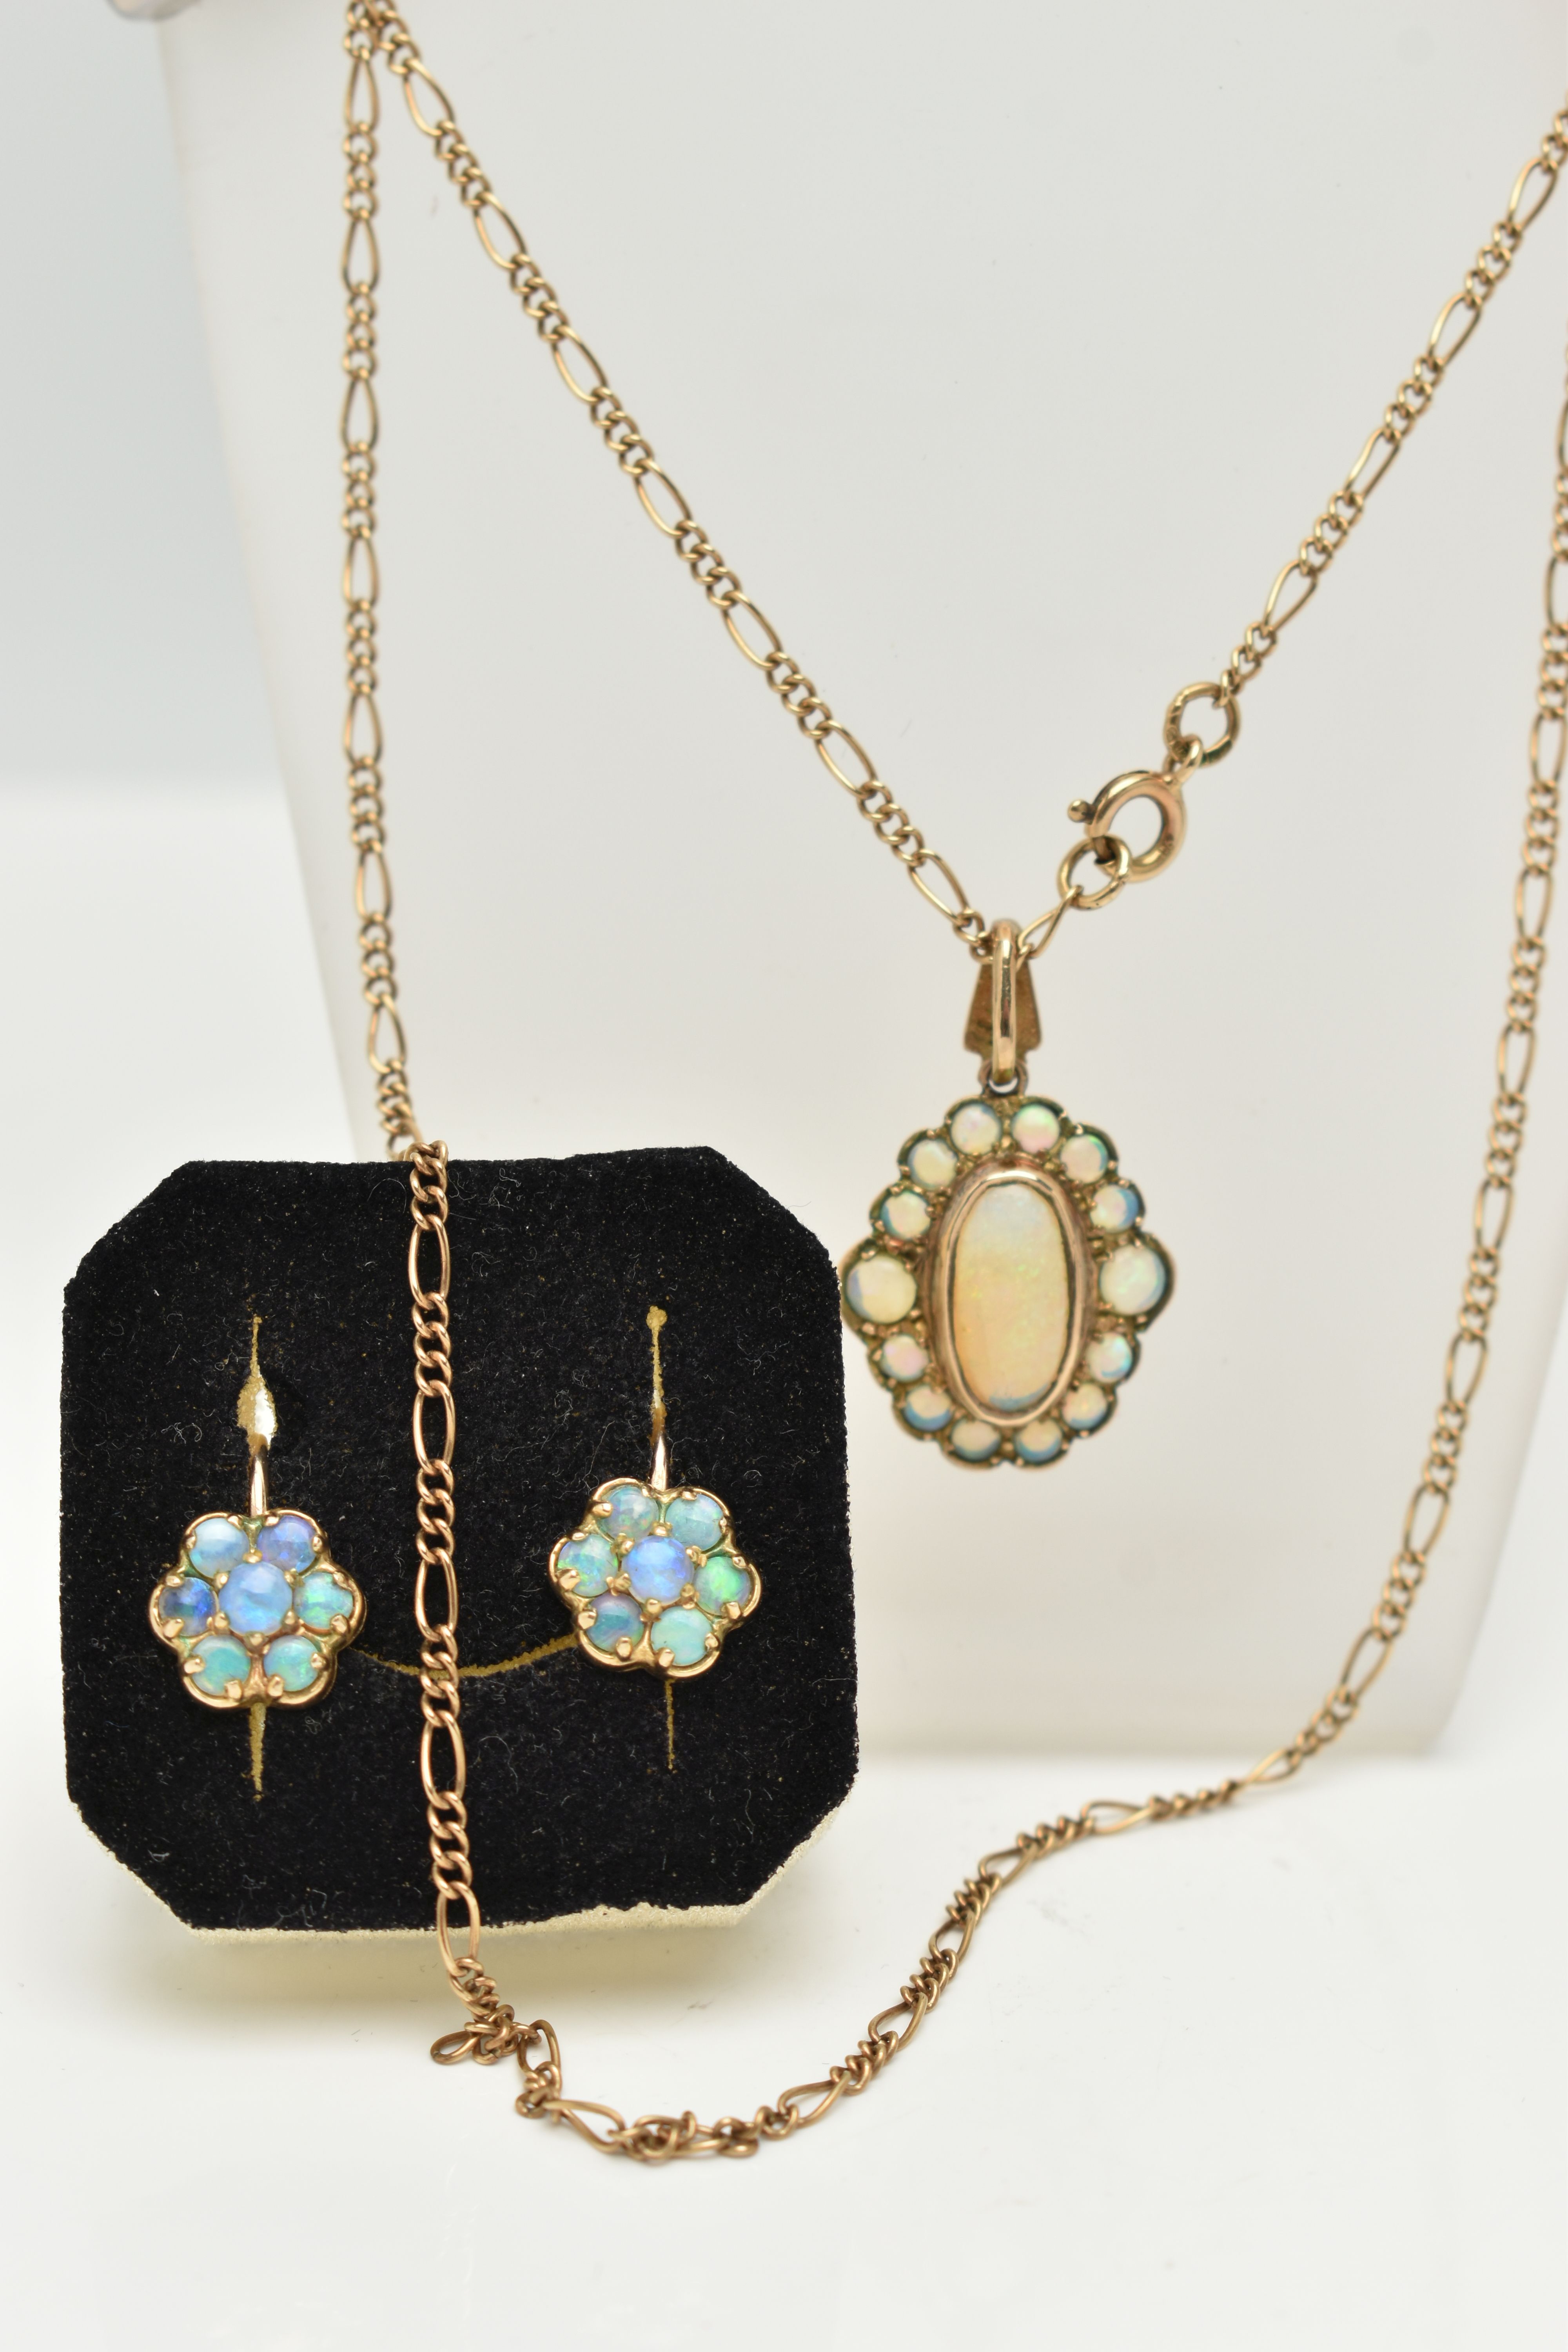 A 9CT OPAL PENDANT NECKLACE AND PAIR OF EARRINGS, the pendant set with a central oval opal